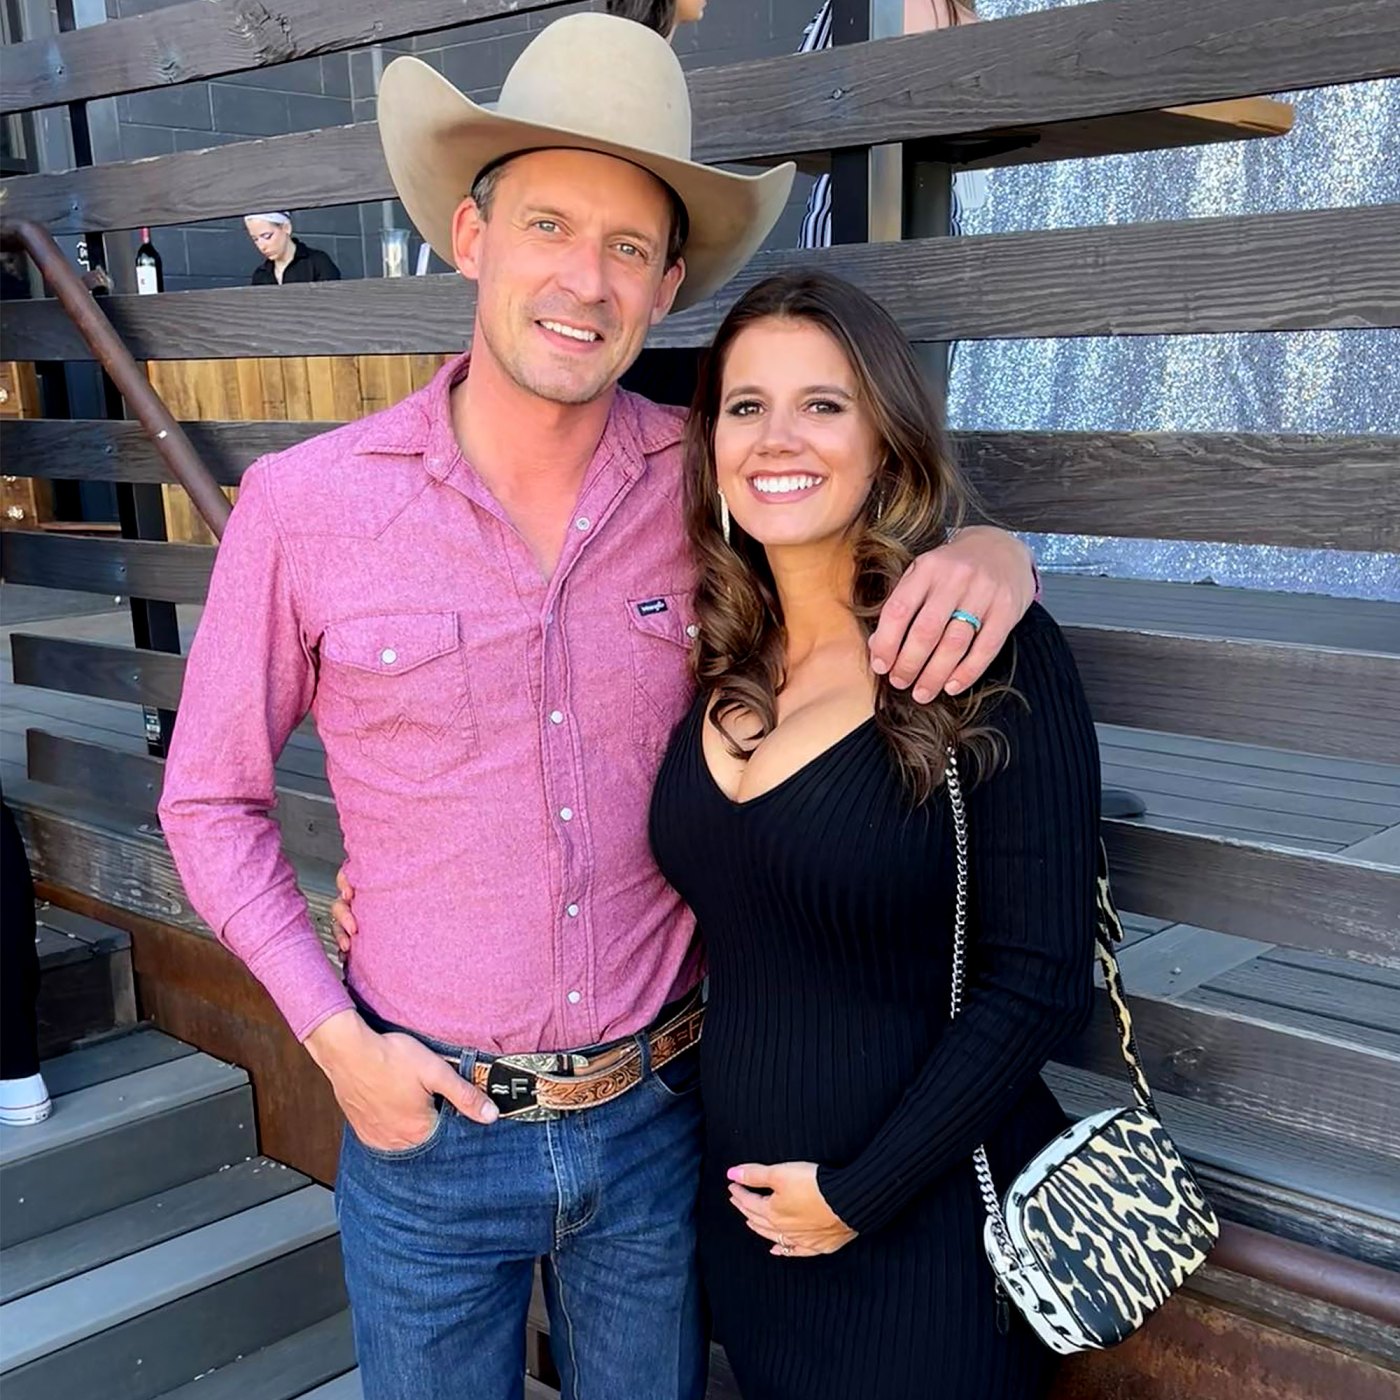 Pregnant Staci, Evan Felker Expecting 2nd Baby After Reconciliation